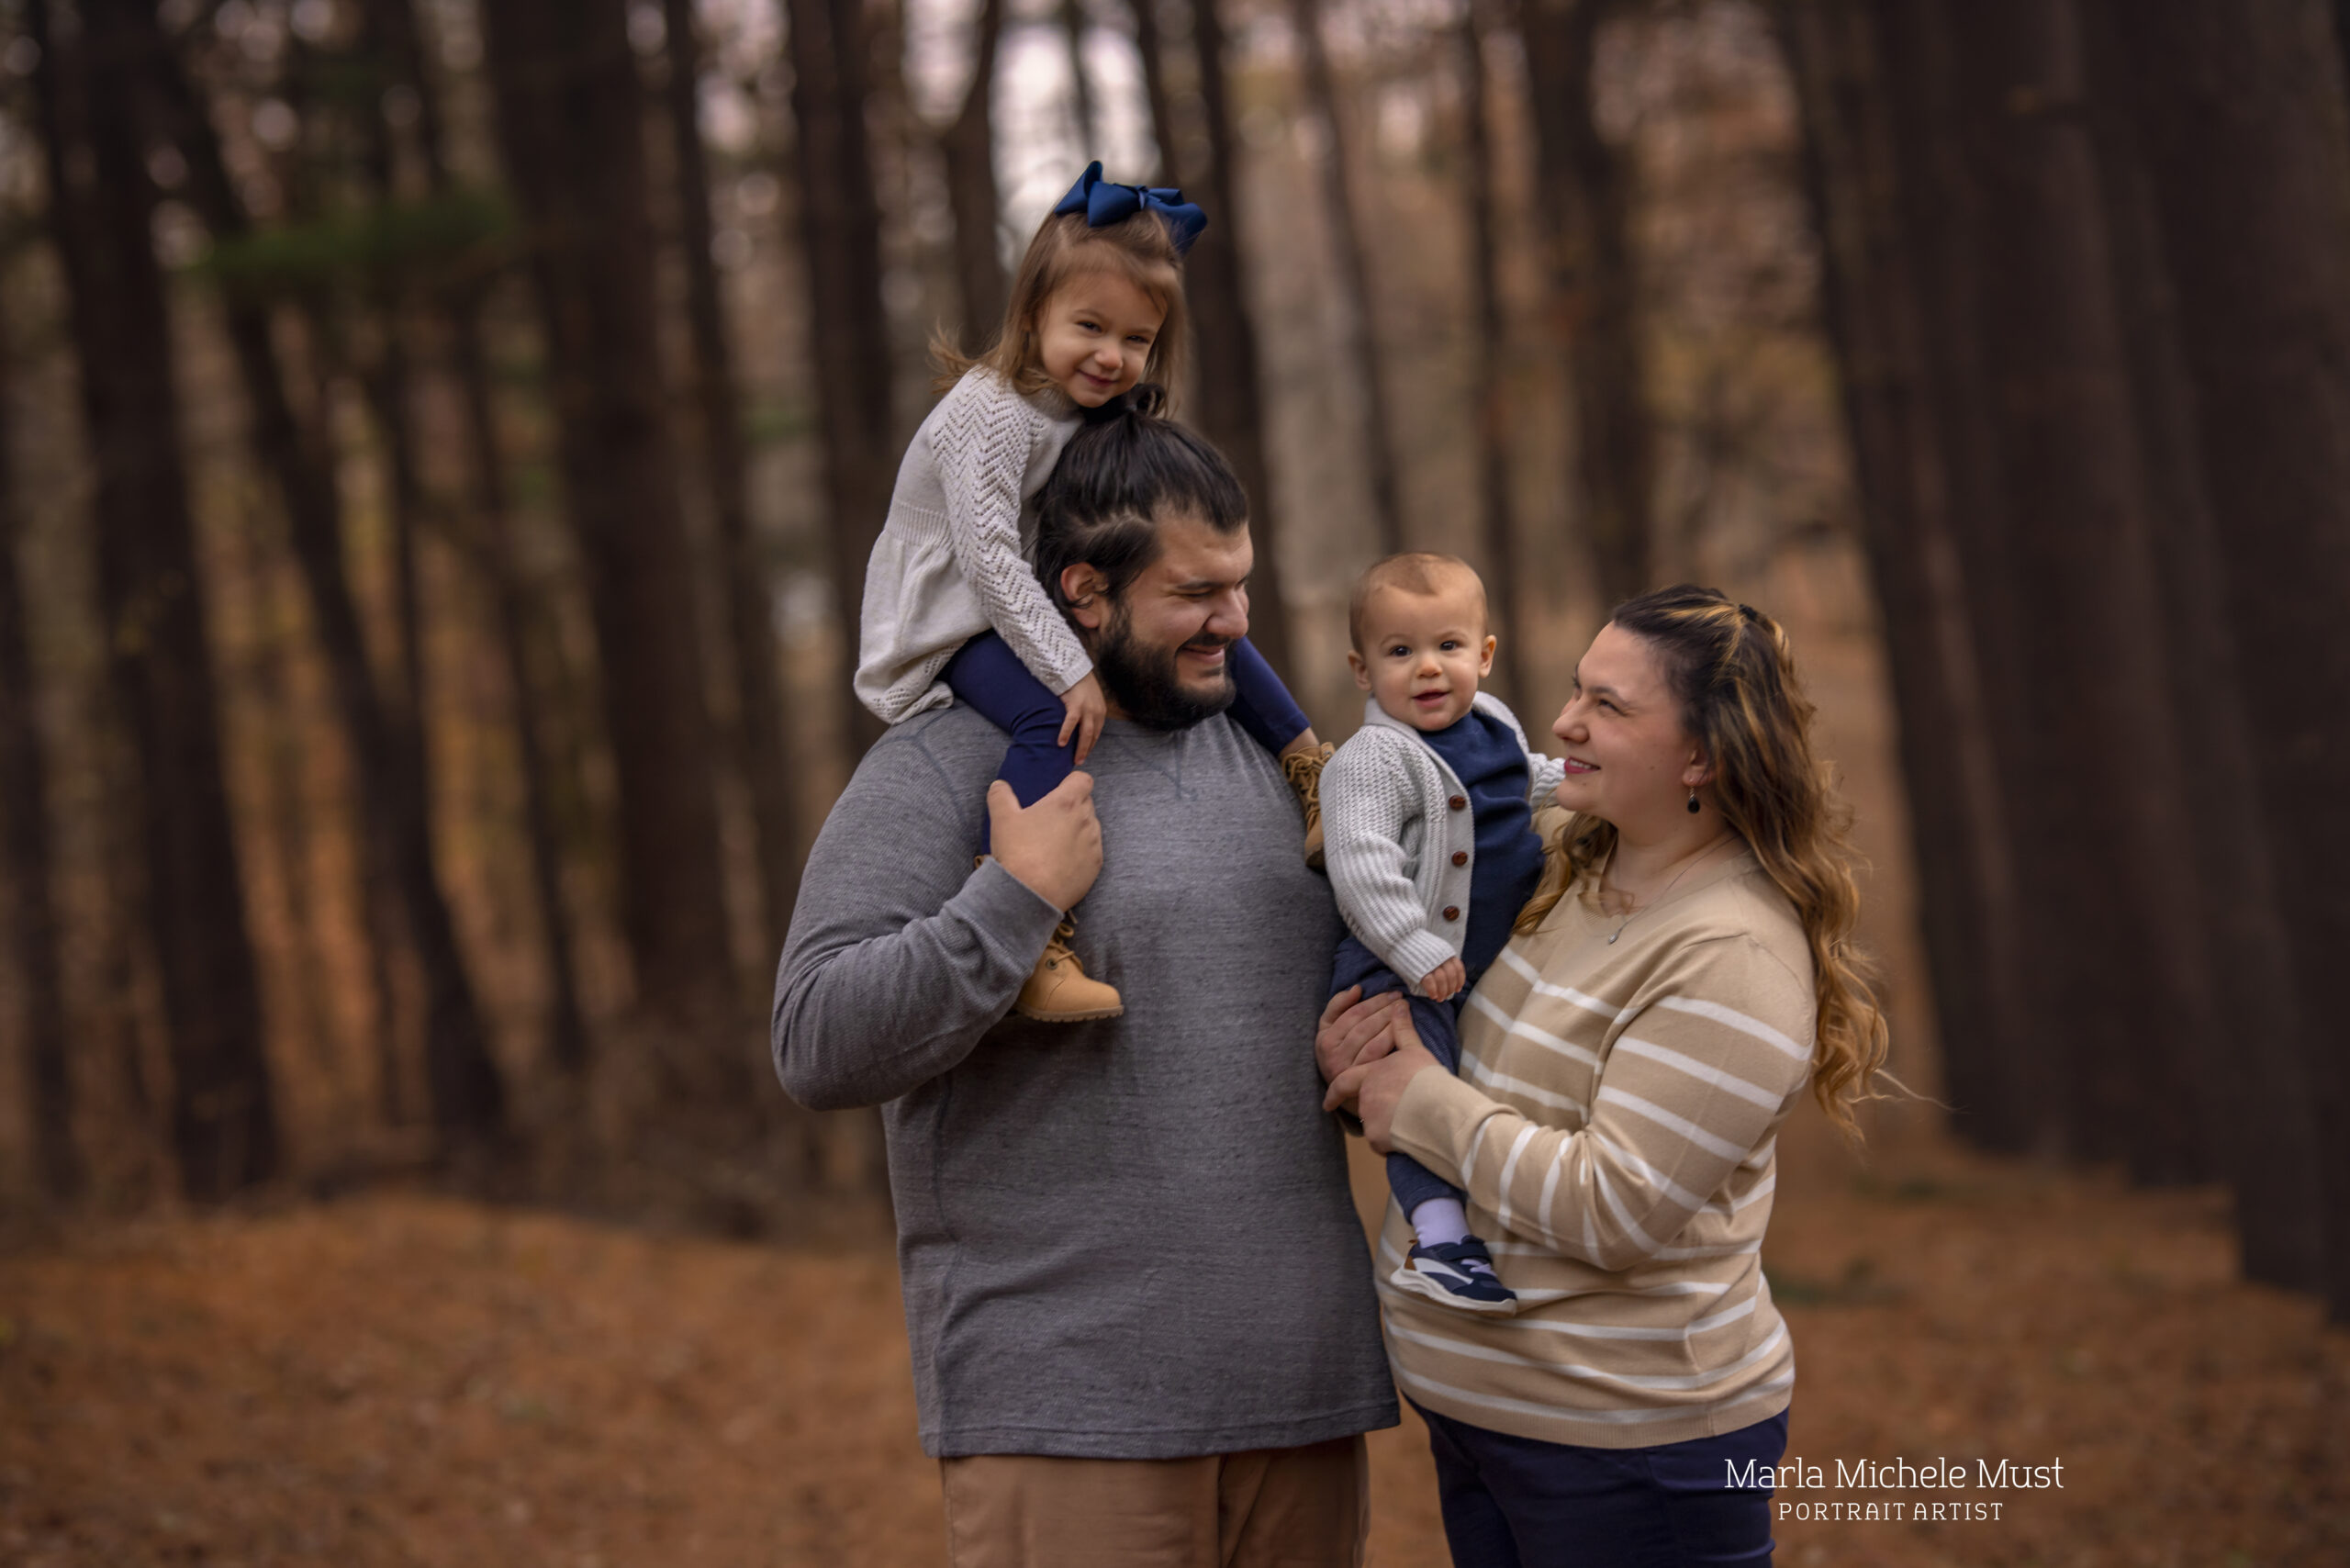 Comfy fall family photoshoot with a couple and their two children being held in their arms and on shoulders